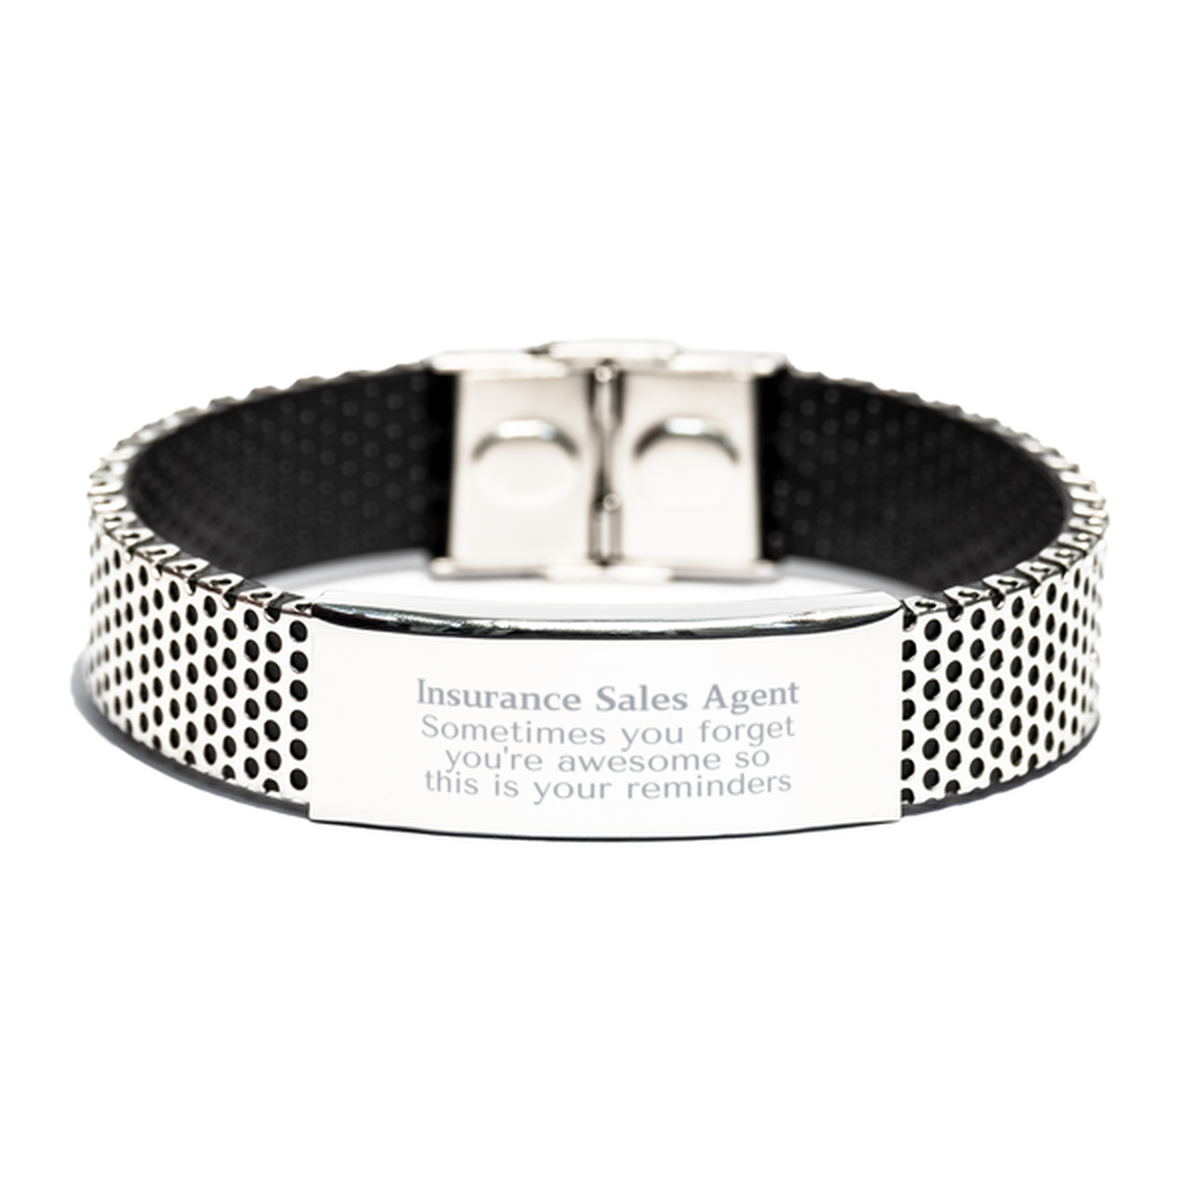 Sentimental Insurance Sales Agent Stainless Steel Bracelet, Insurance Sales Agent Sometimes you forget you're awesome so this is your reminders, Graduation Christmas Birthday Gifts for Insurance Sales Agent, Men, Women, Coworkers